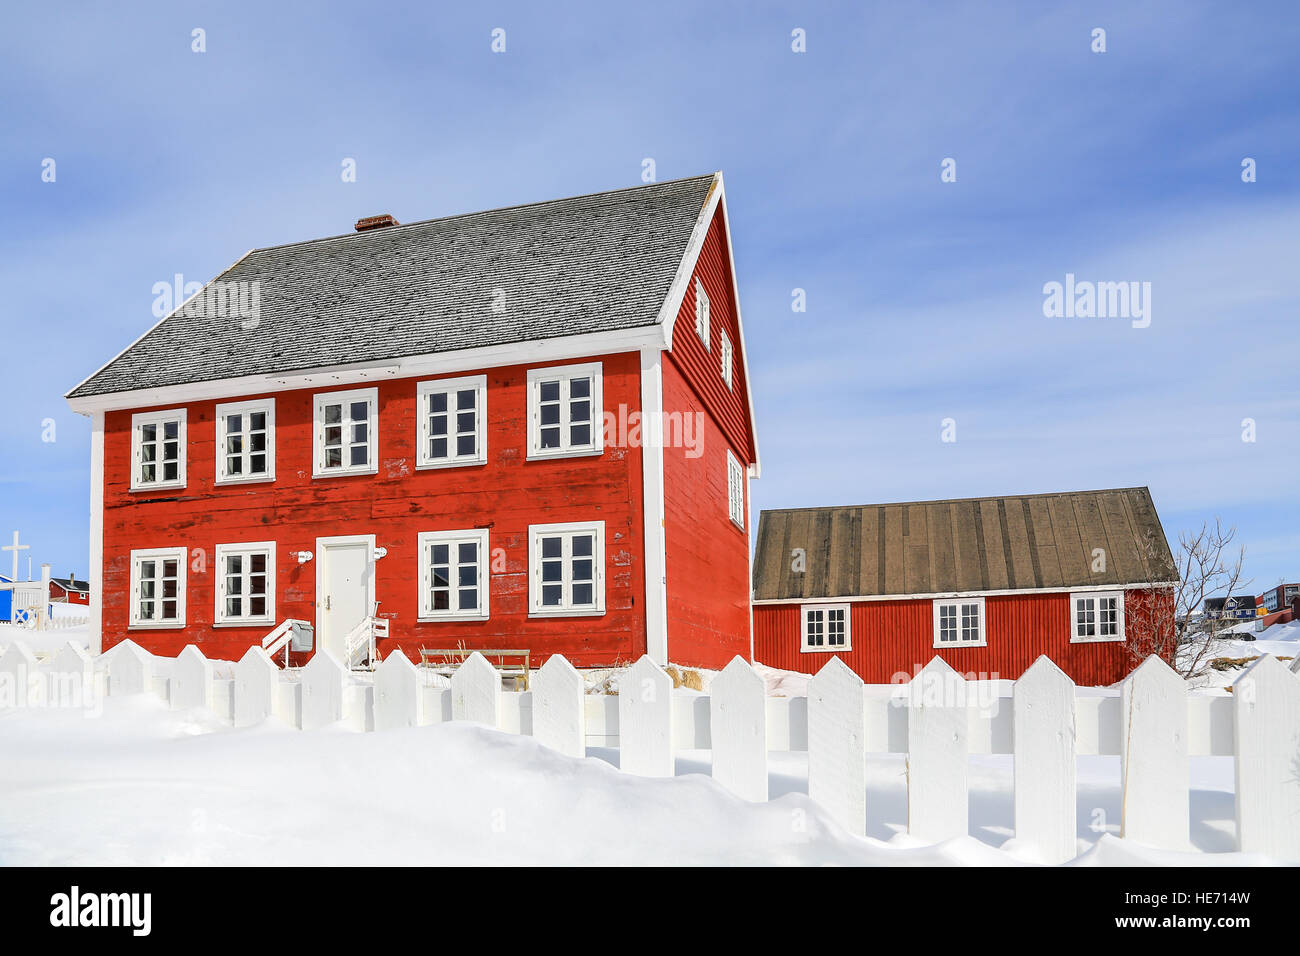 Santa Claus house and one of a few tree in Nuuk, Greenland Stock Photo